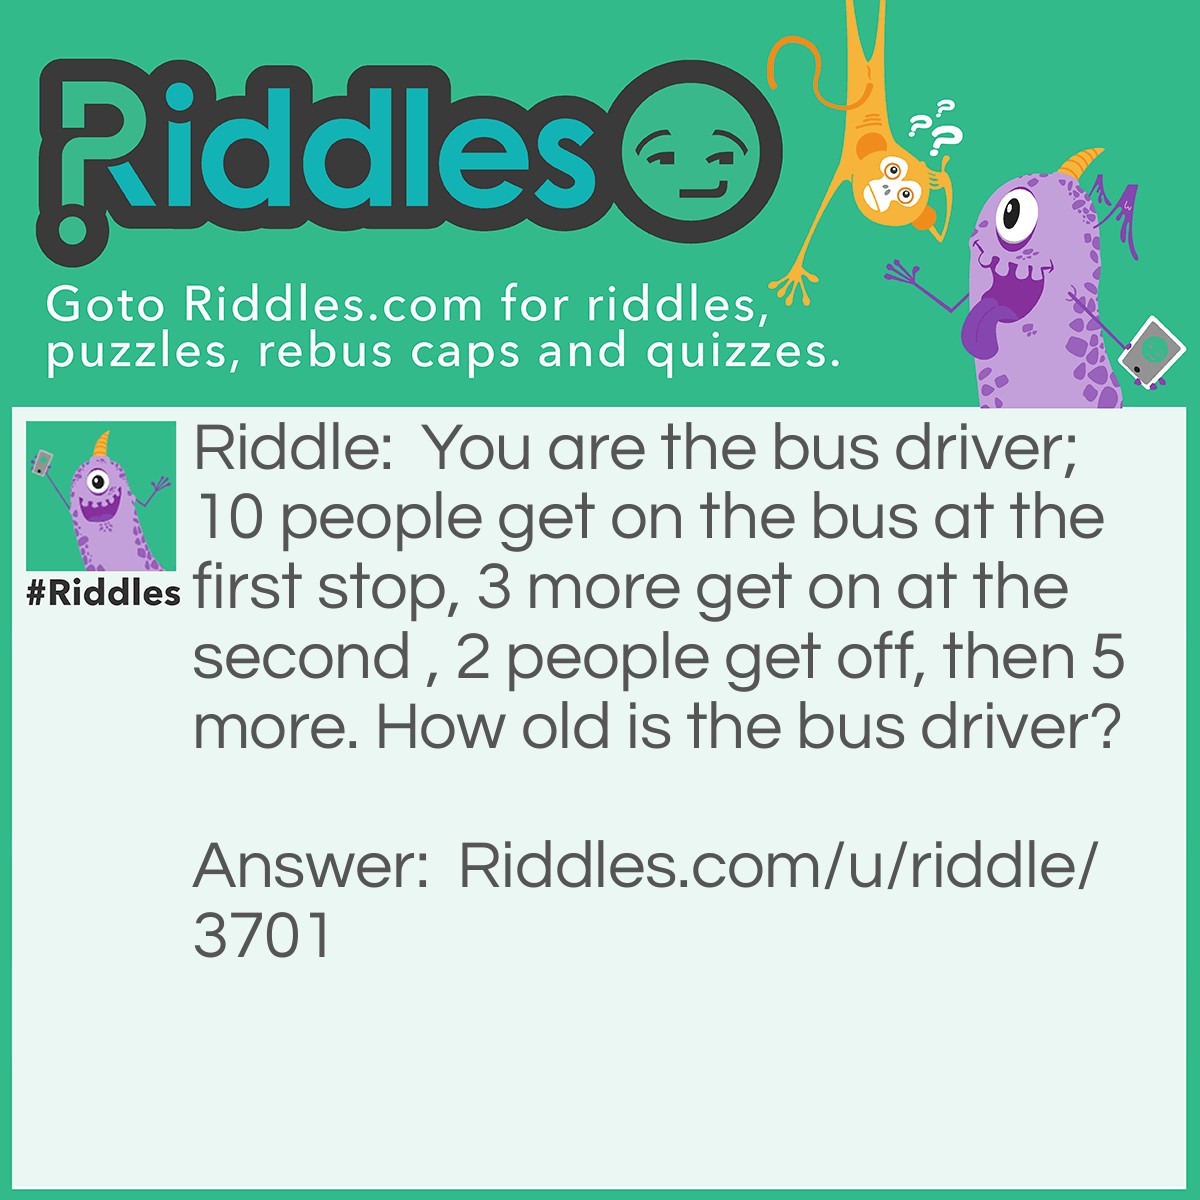 Riddle: You are the bus driver;10 people get on the bus at the first stop, 3 more get on at the second , 2 people get off, then 5 more. How old is the bus driver? Answer: Your age.